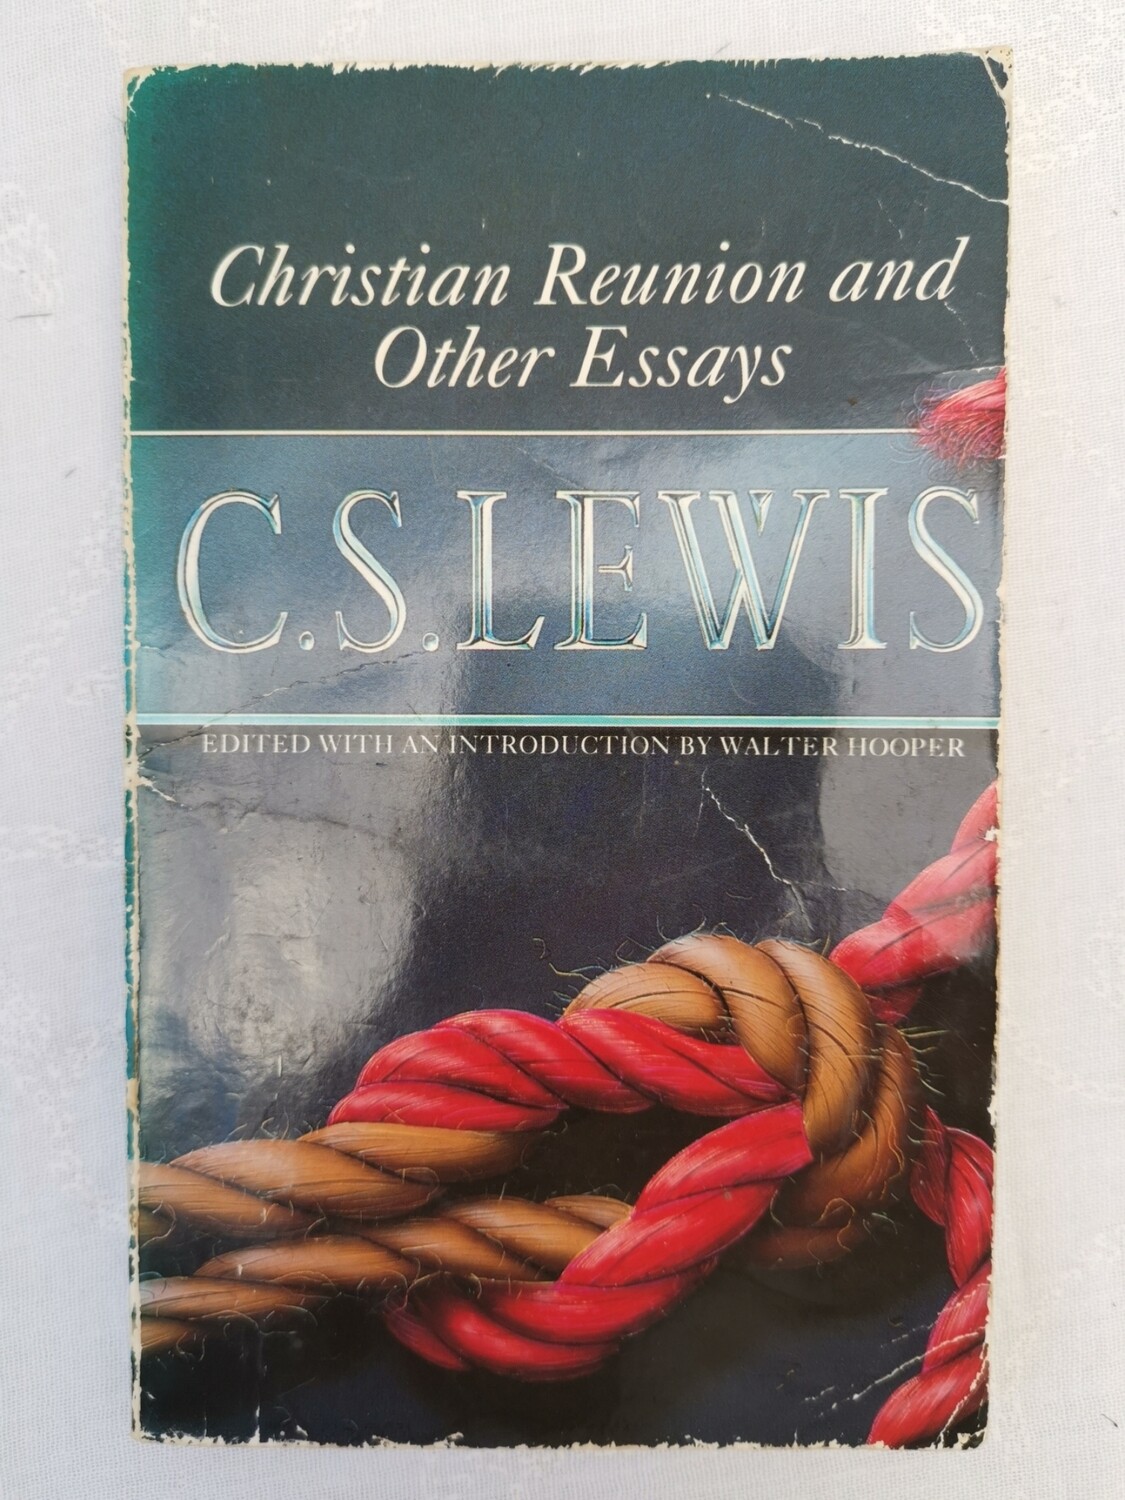 Christian reunion and other essays, C. S. Lewis